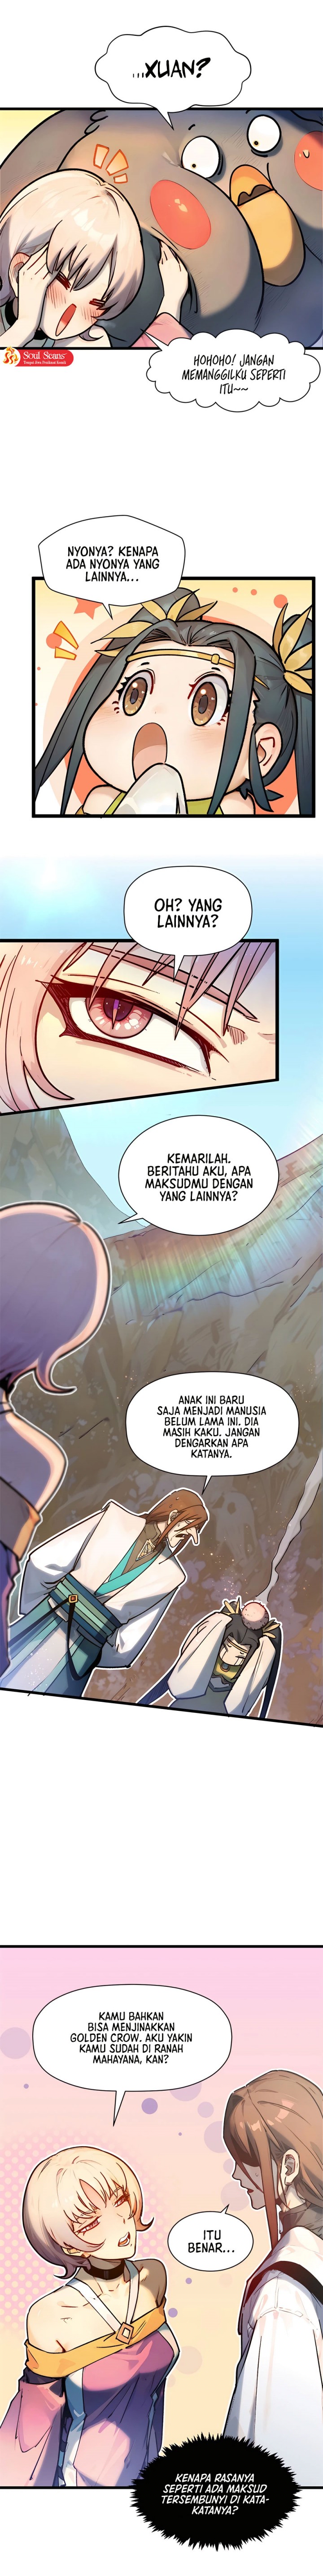 Dilarang COPAS - situs resmi www.mangacanblog.com - Komik top tier providence secretly cultivate for a thousand years 150 - chapter 150 151 Indonesia top tier providence secretly cultivate for a thousand years 150 - chapter 150 Terbaru 10|Baca Manga Komik Indonesia|Mangacan